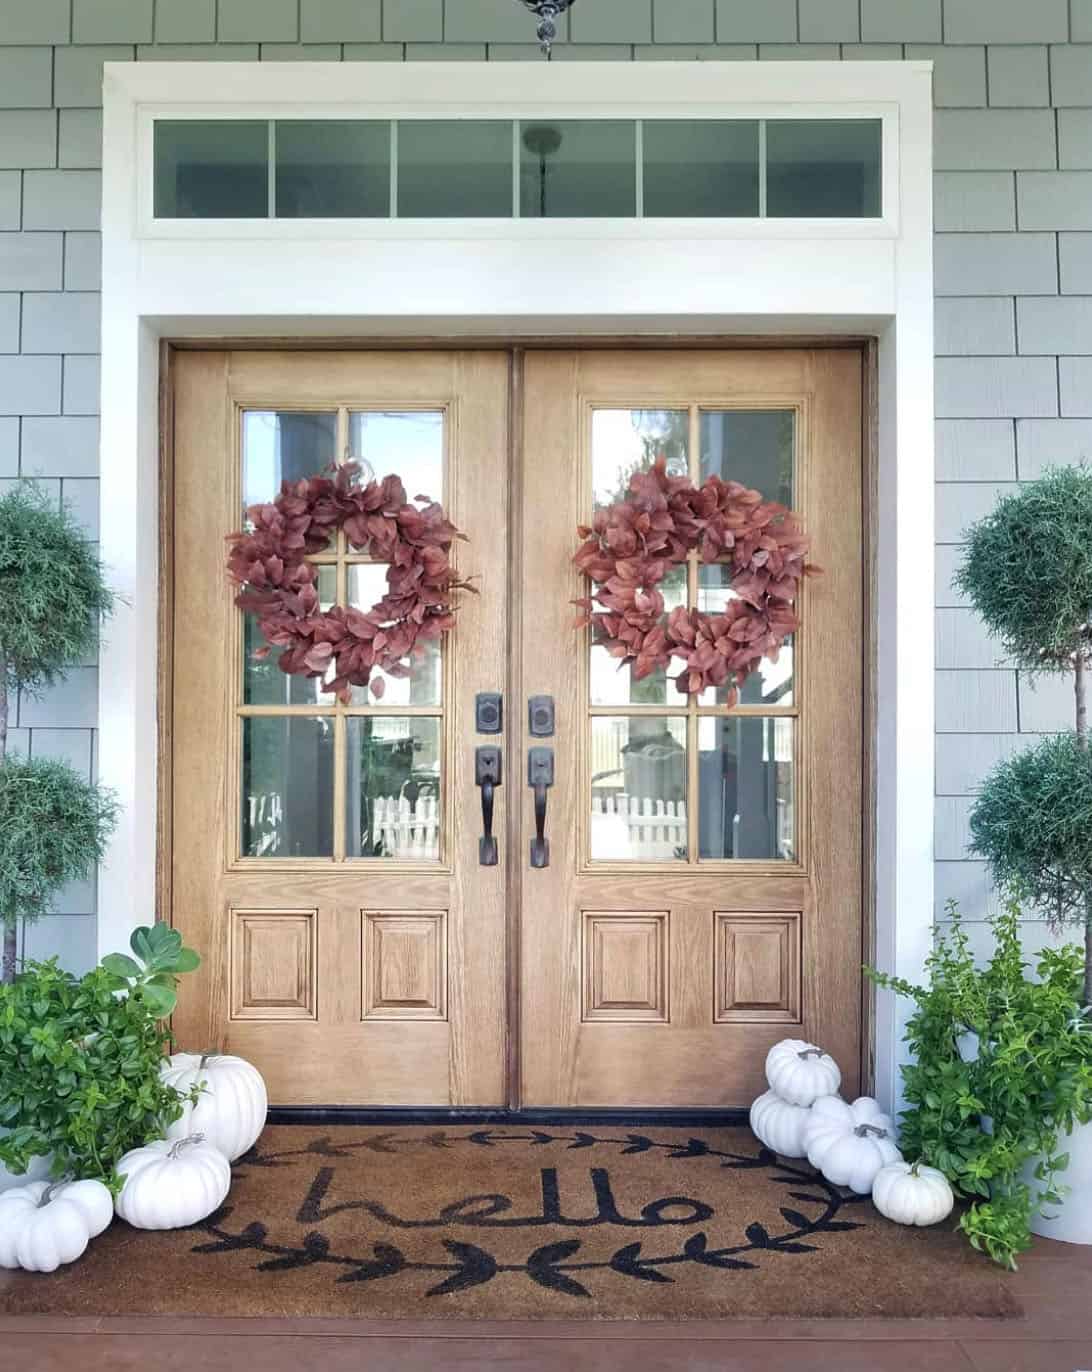 fall-decorated-front-porch